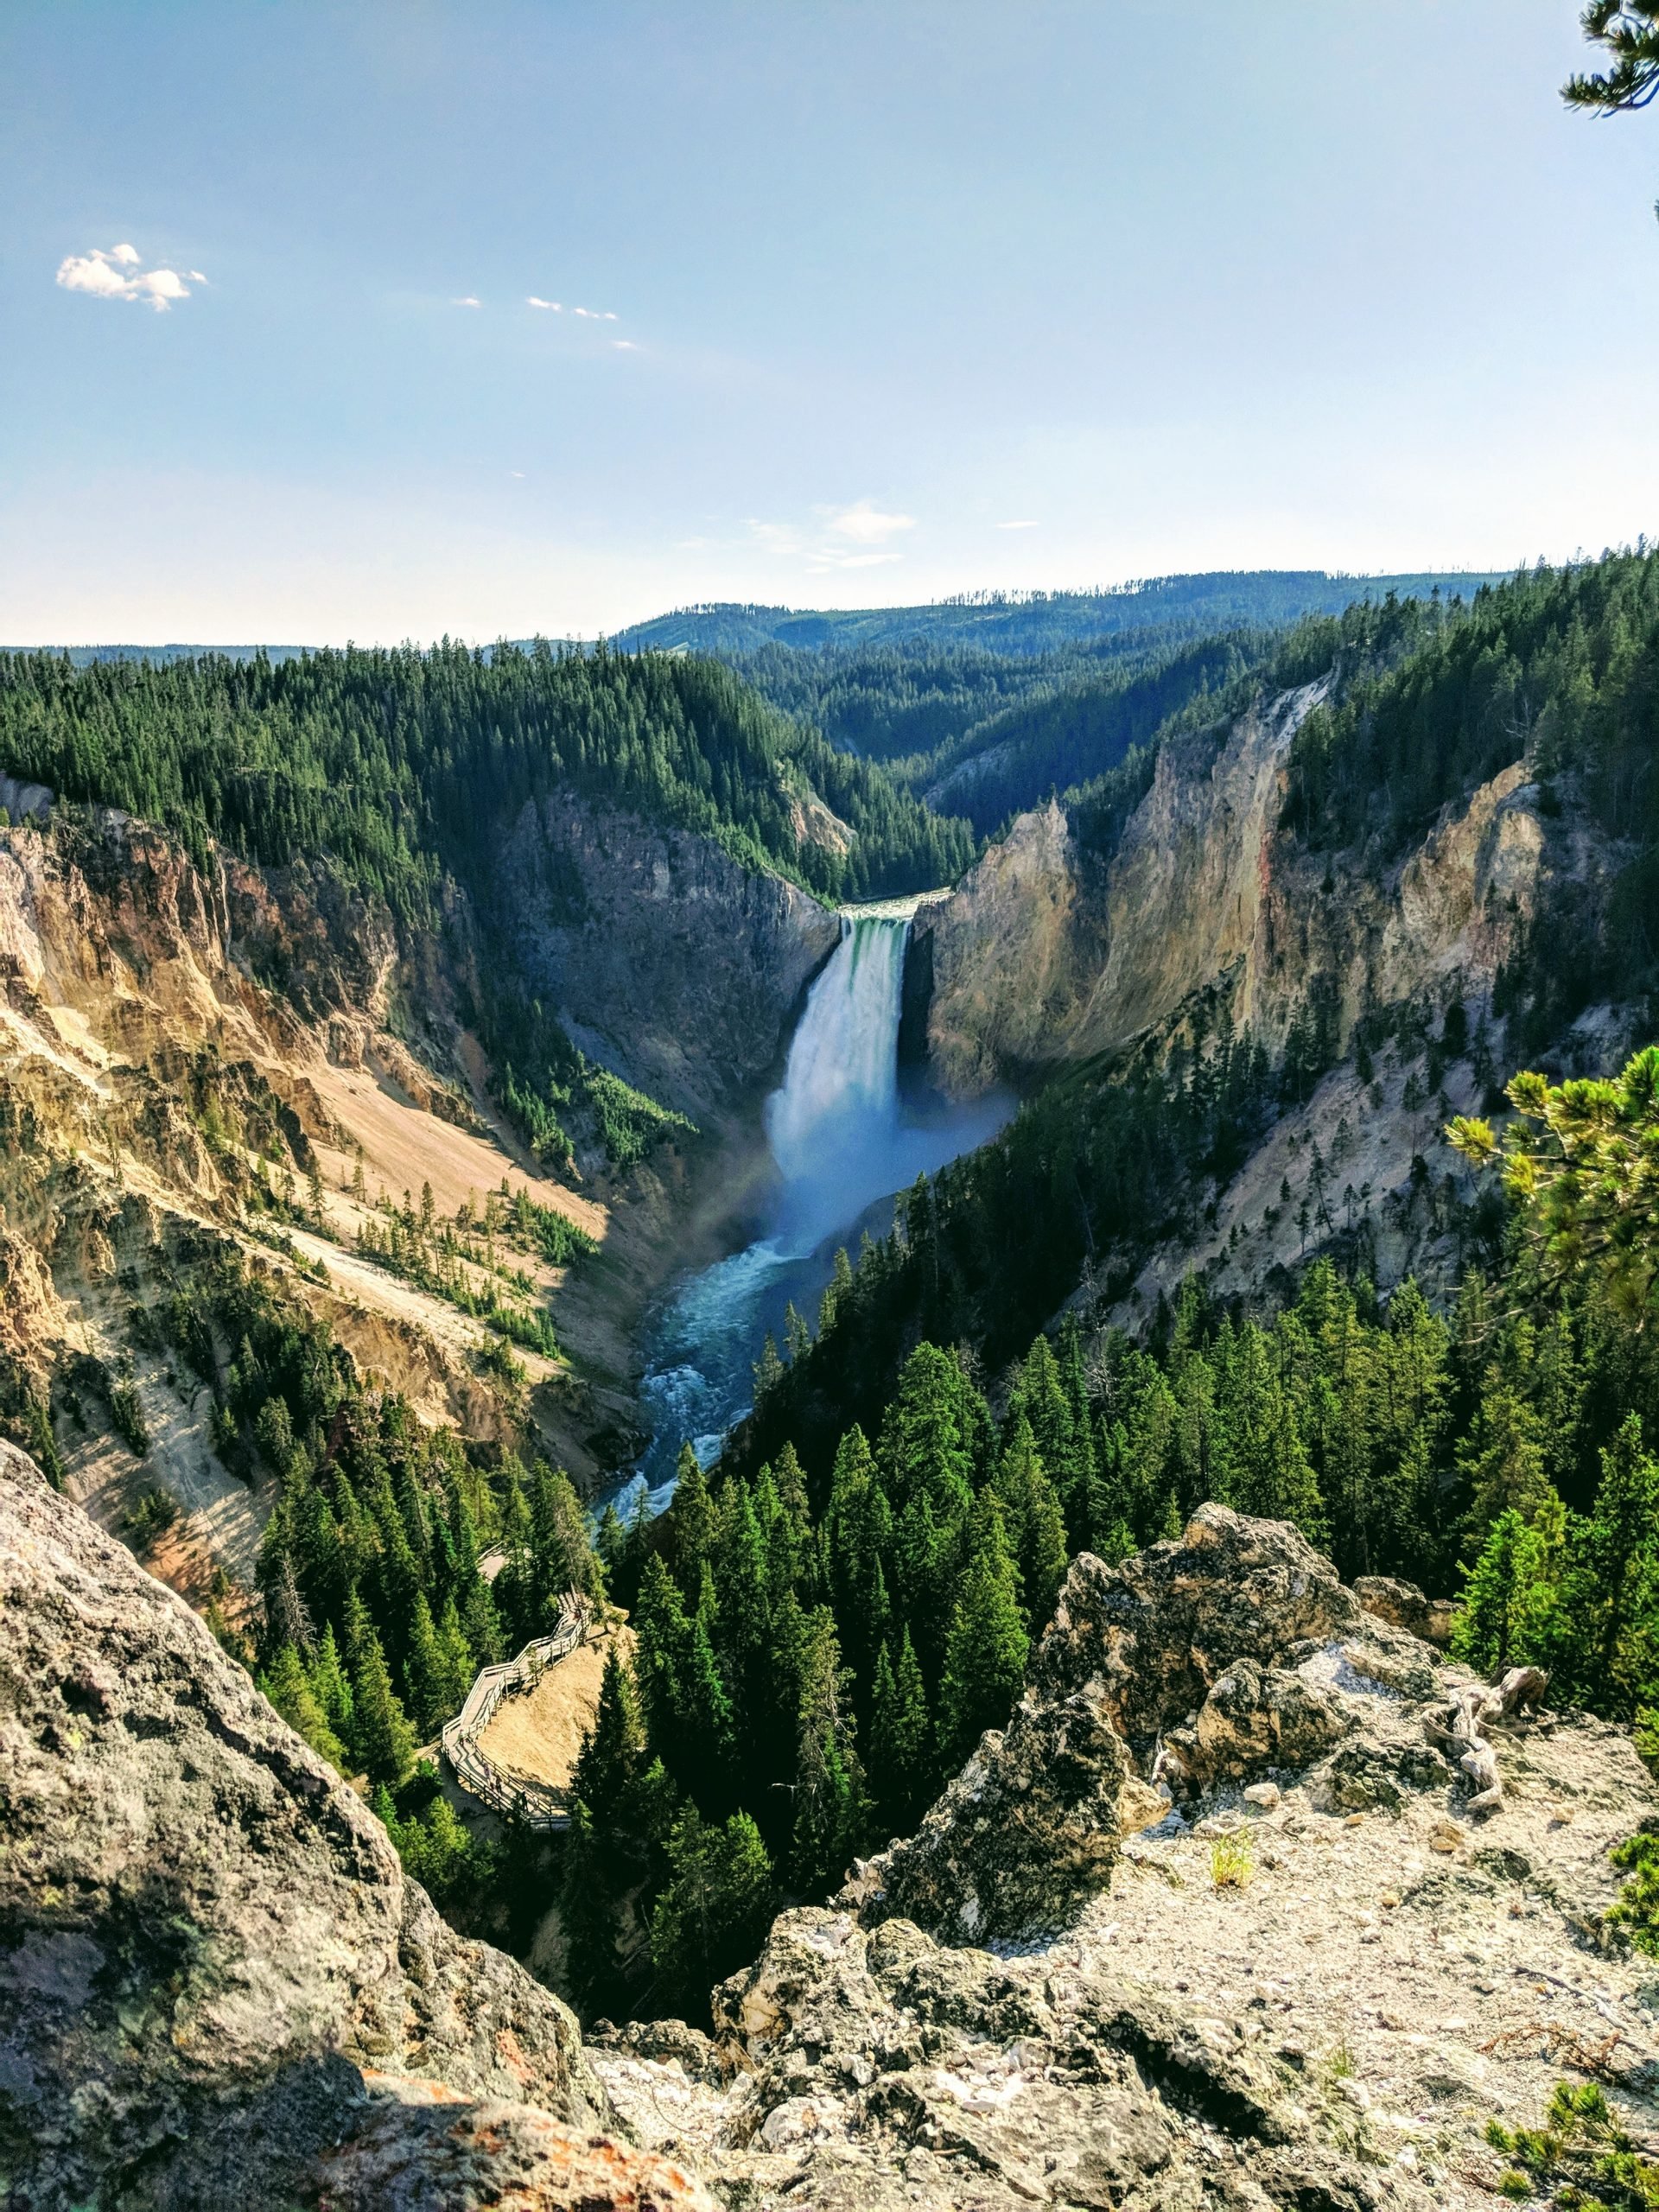 How To Get From Bozeman Airport To Yellowstone National Park - All Possible Ways, cheapest way from Bozeman airport to Yellowstone National Park, Bozeman airport to Yellowstone National Park, Bozeman shuttle Bus Airport, Bozeman to Yellowstone